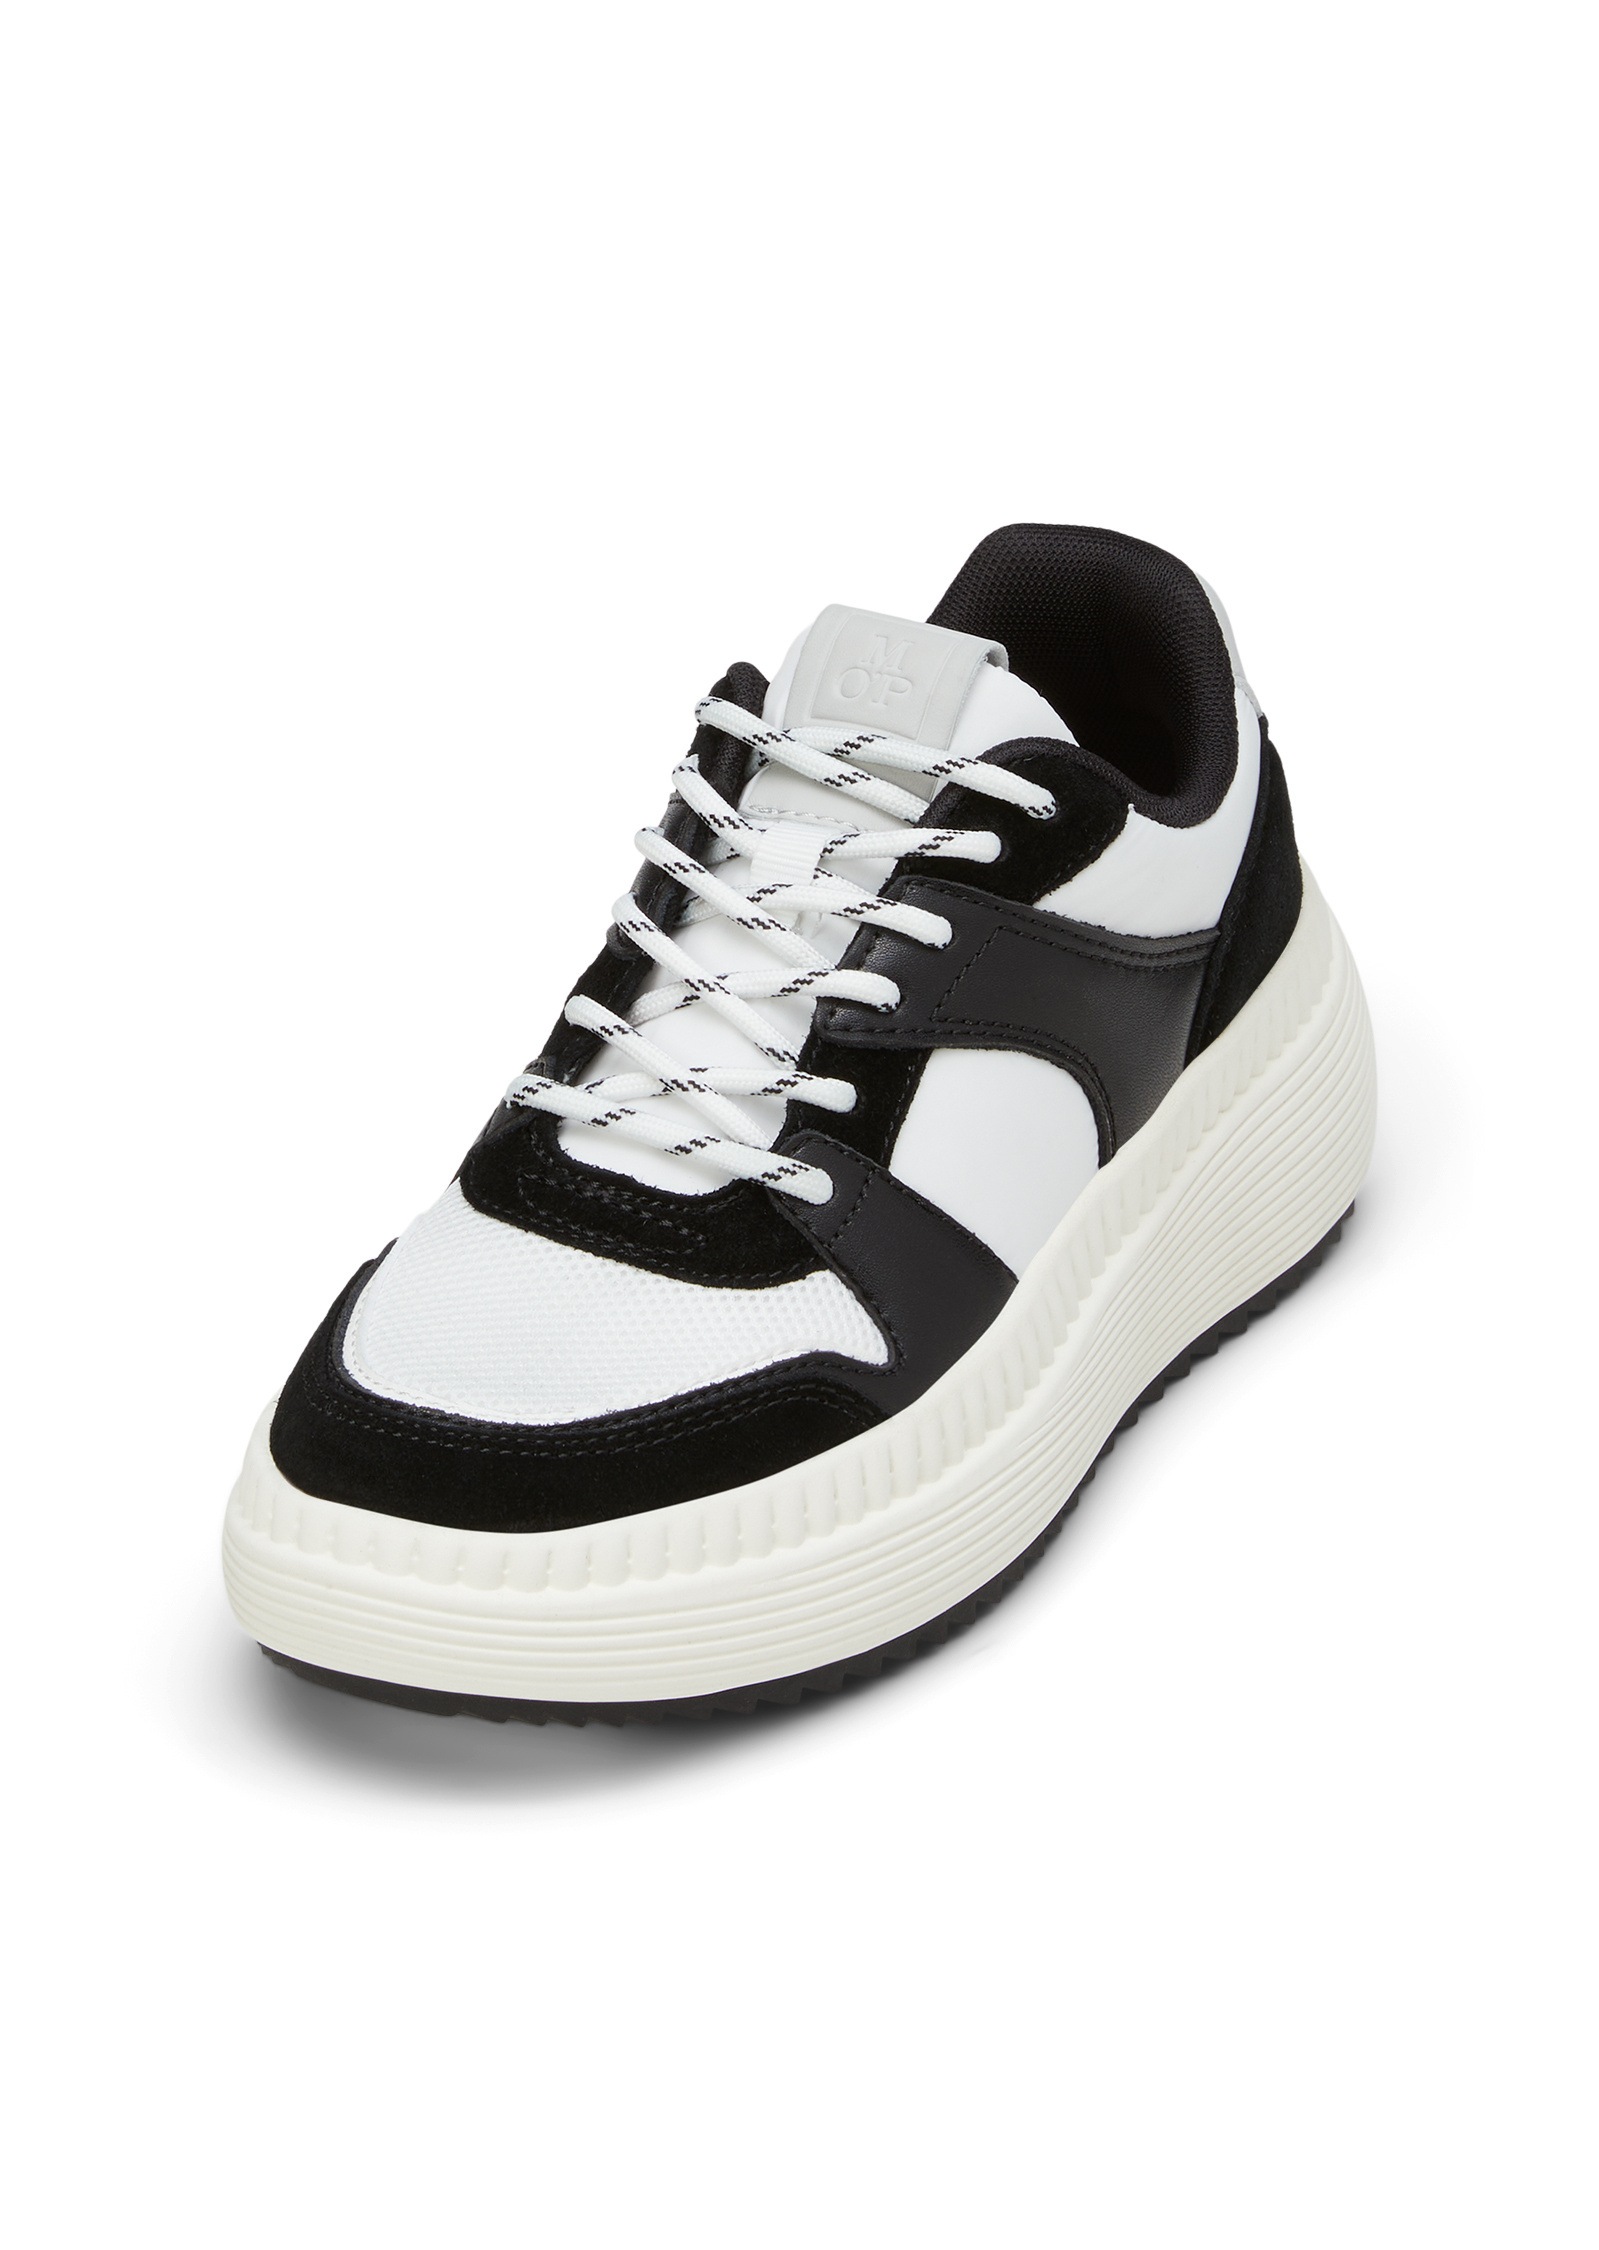 Marc O'Polo Sneaker »mit Farb- ir Material-Mix«